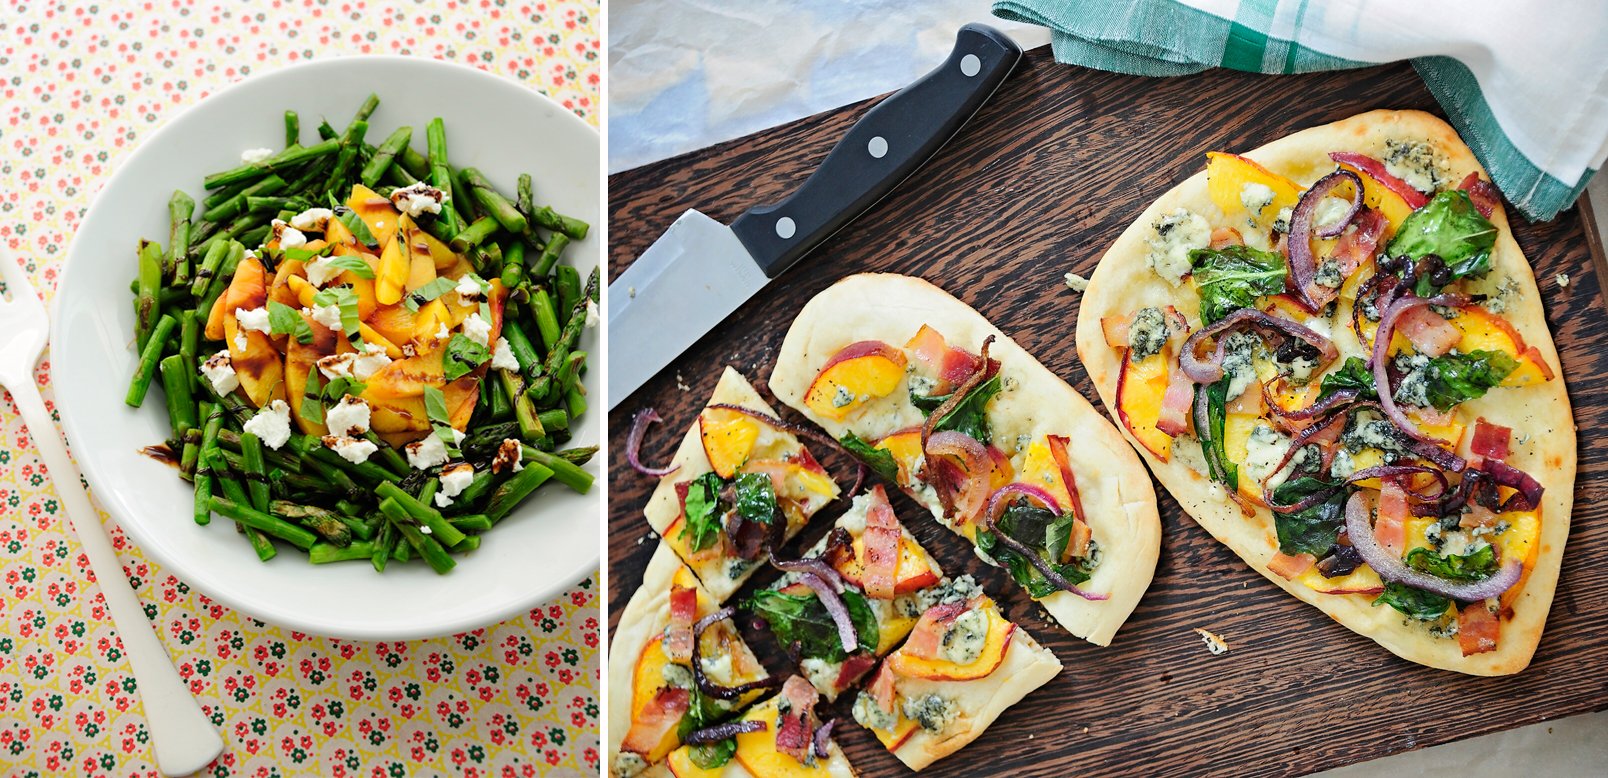 Two side by side photos by Stephanie Mullins of a salad and artisan pizza.